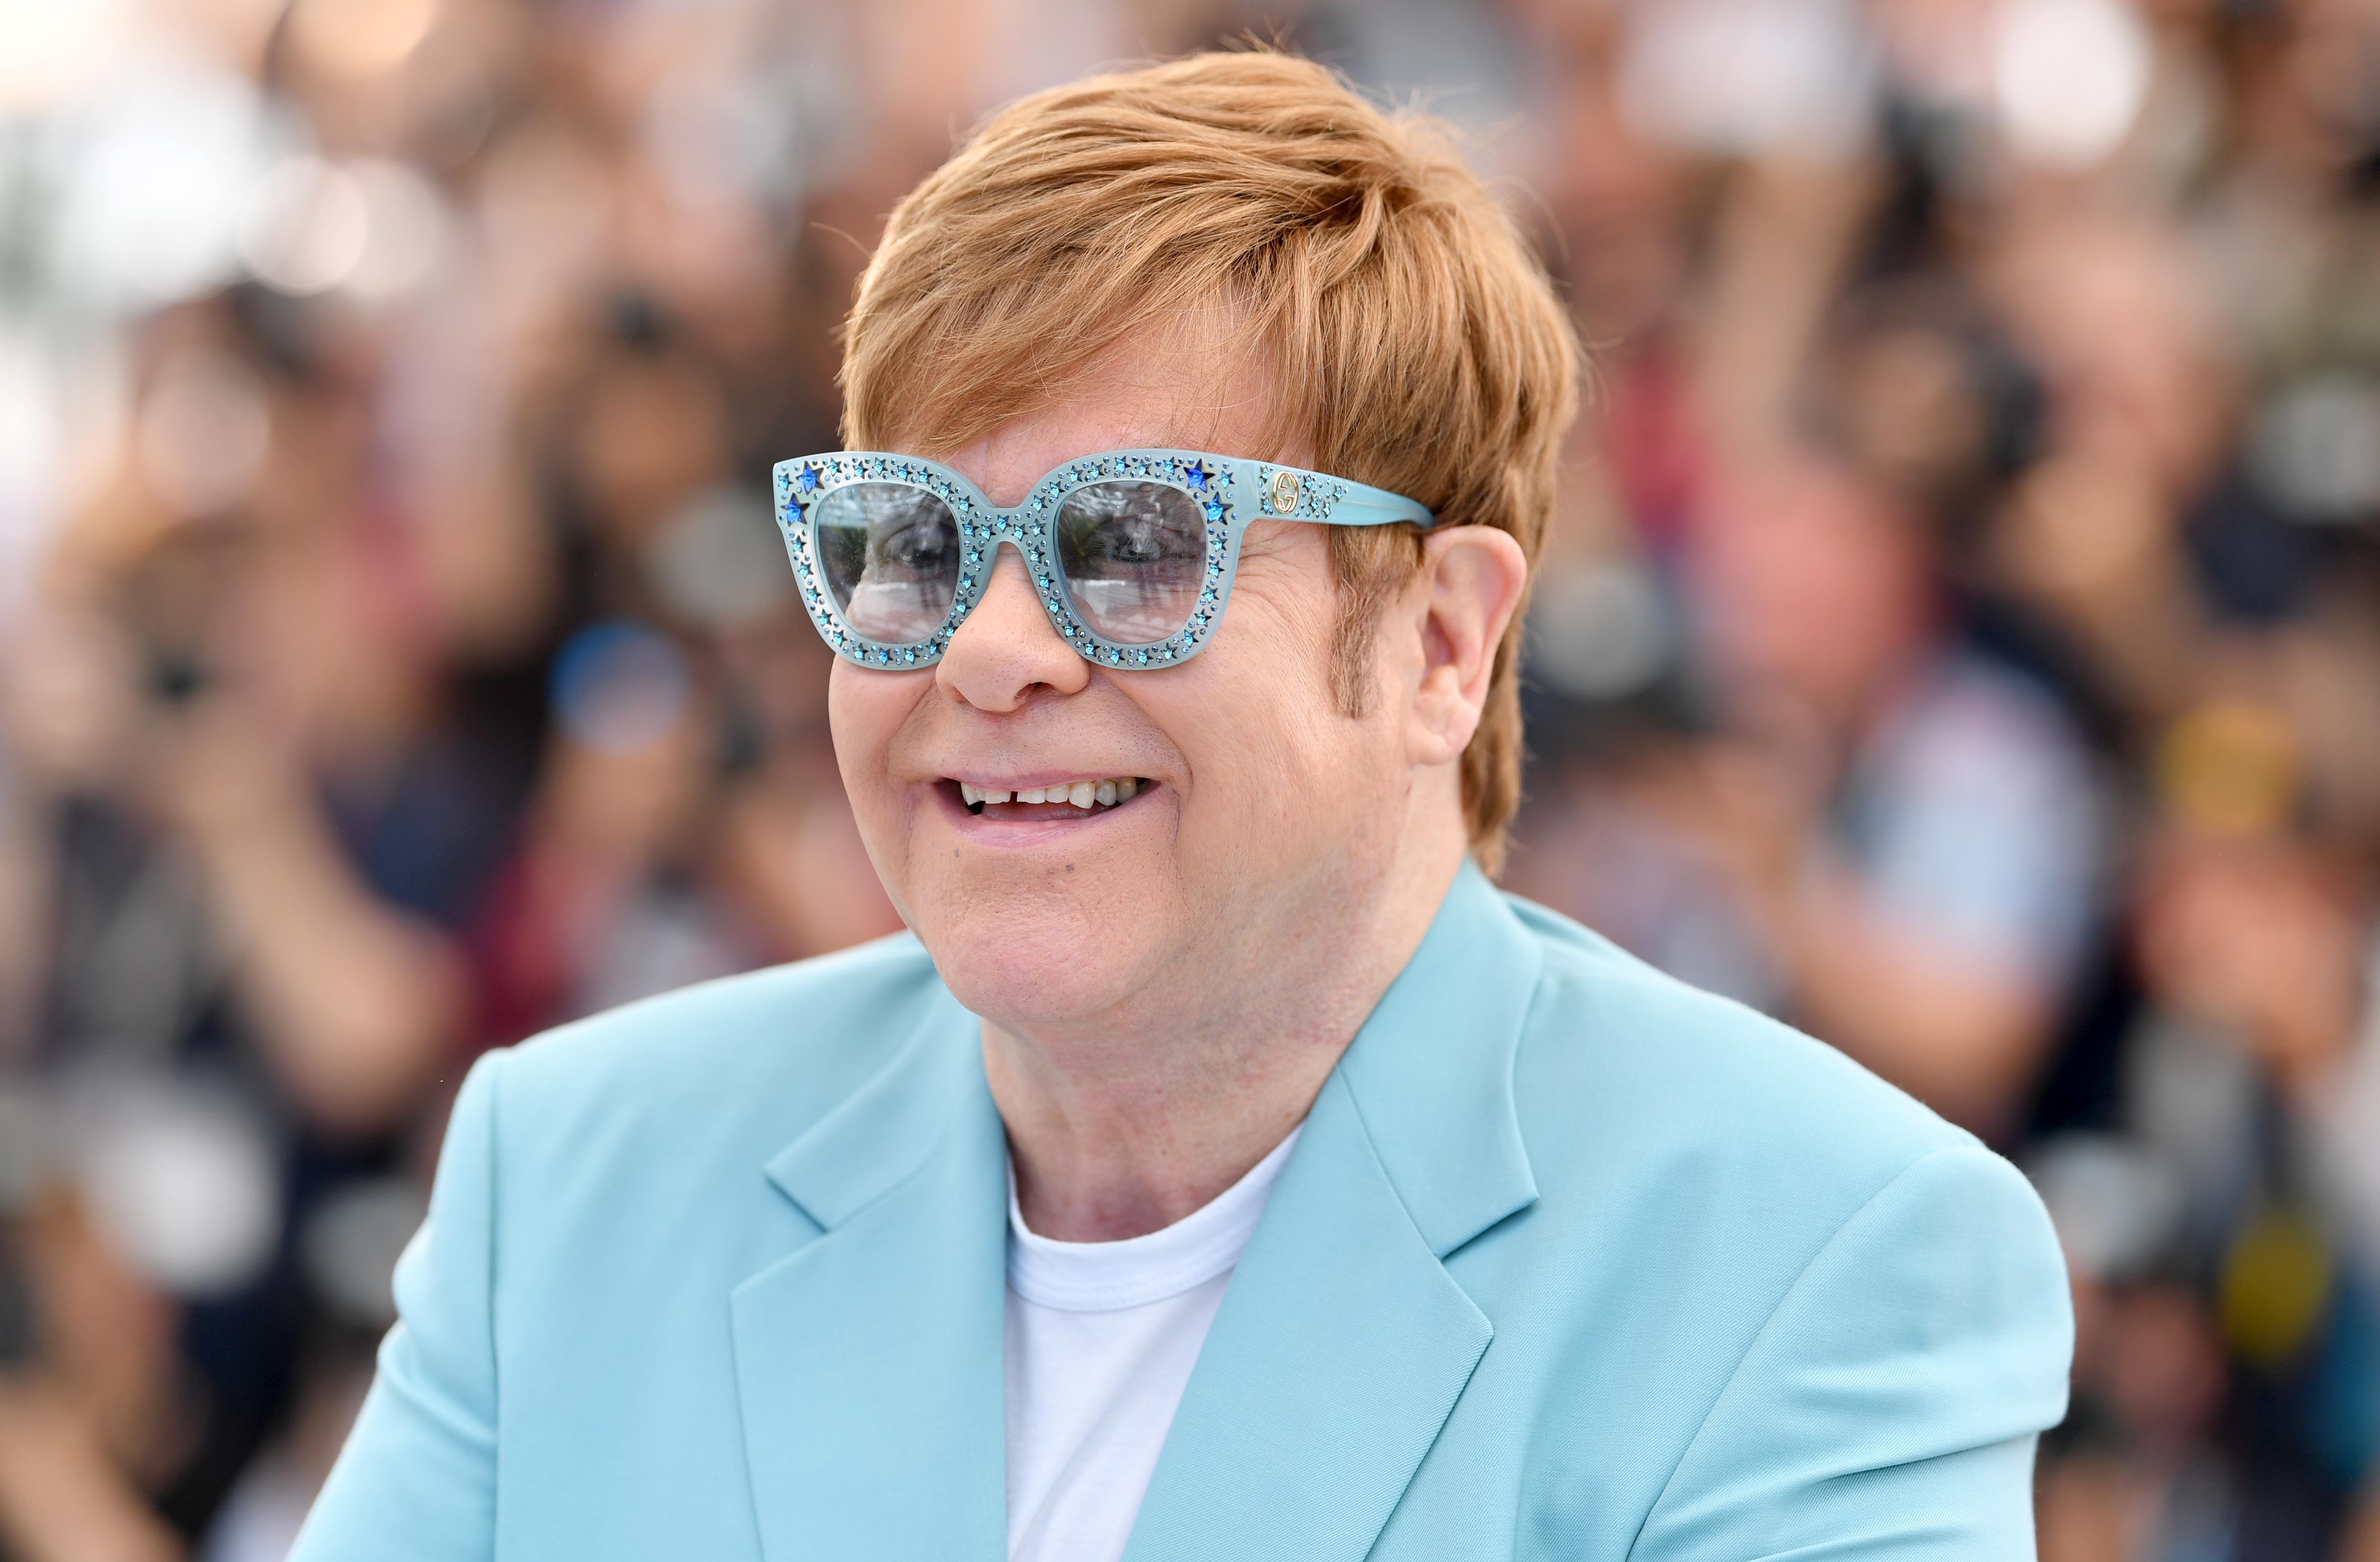  Elton John attends the photocall for "Rocketman" during the 72nd annual Cannes Film Festival on May 16, 2019 | Photo: Getty Images